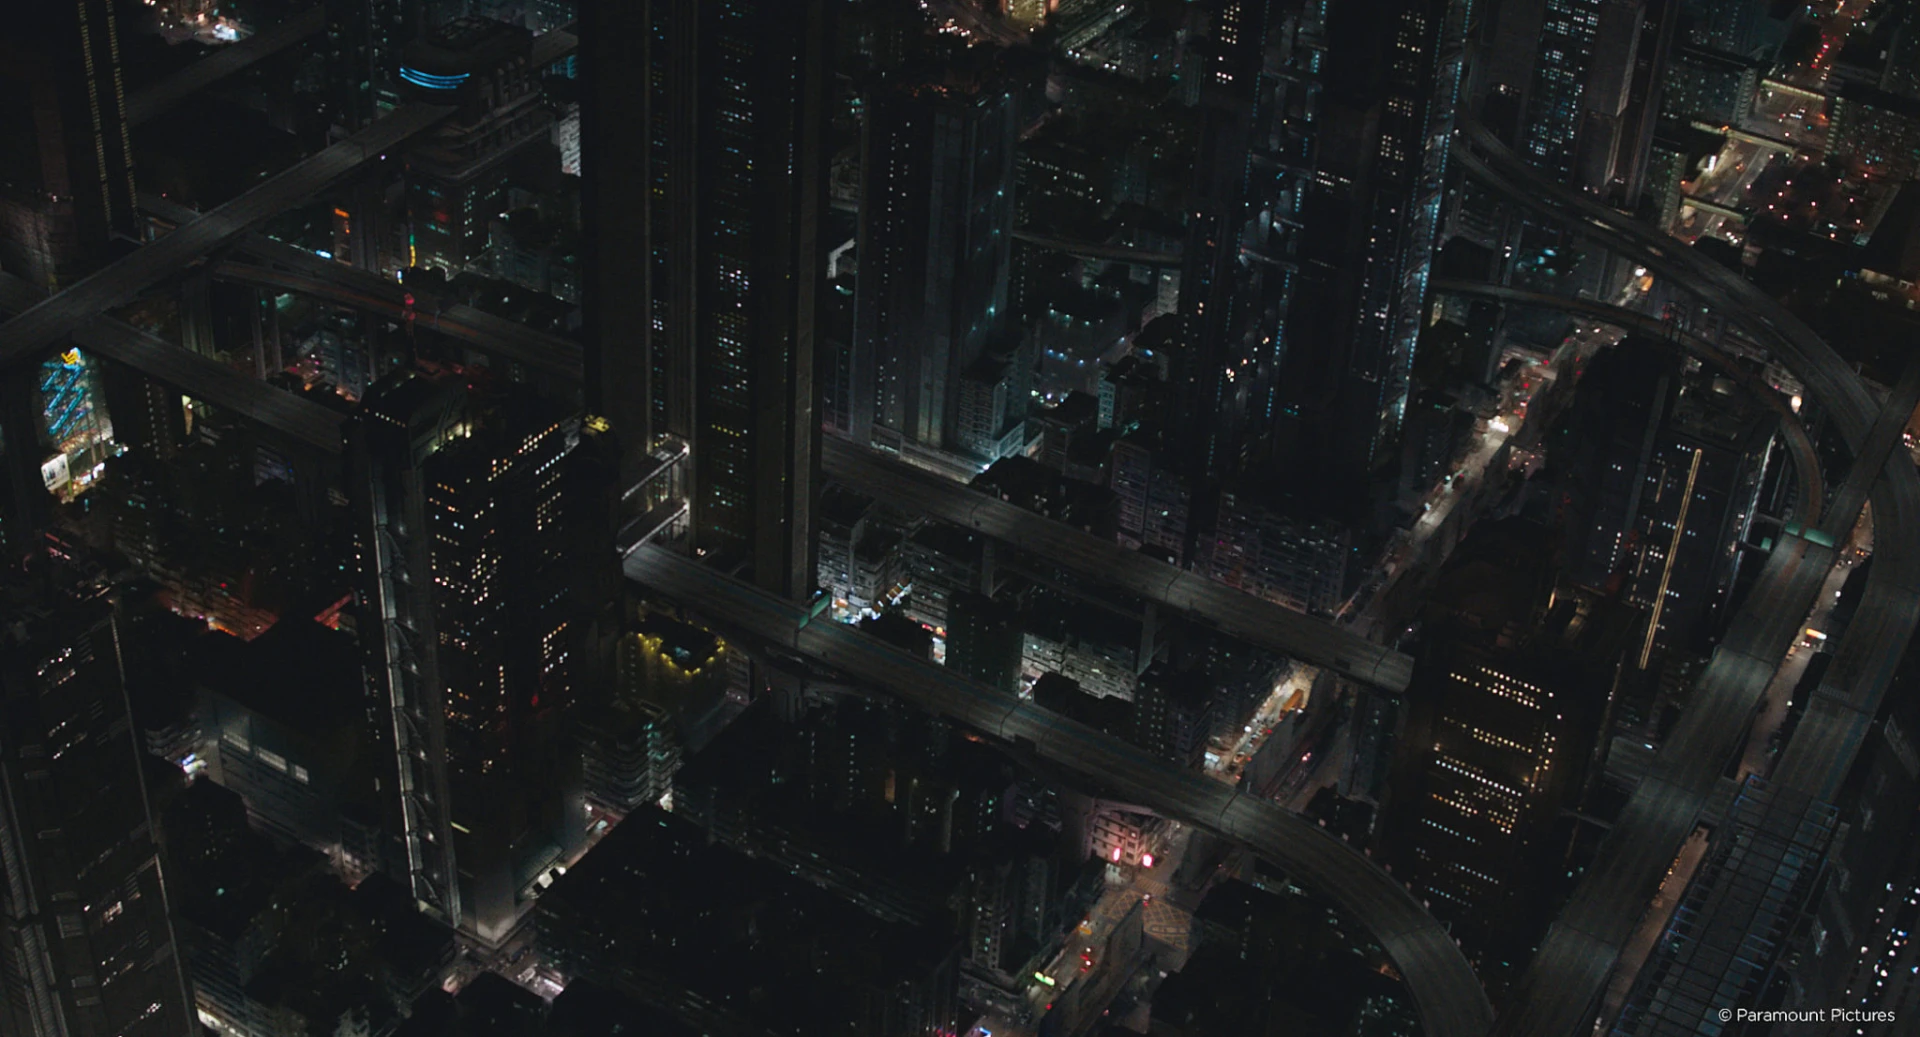 Ghost in the shell city view shot night from Raynault vfx